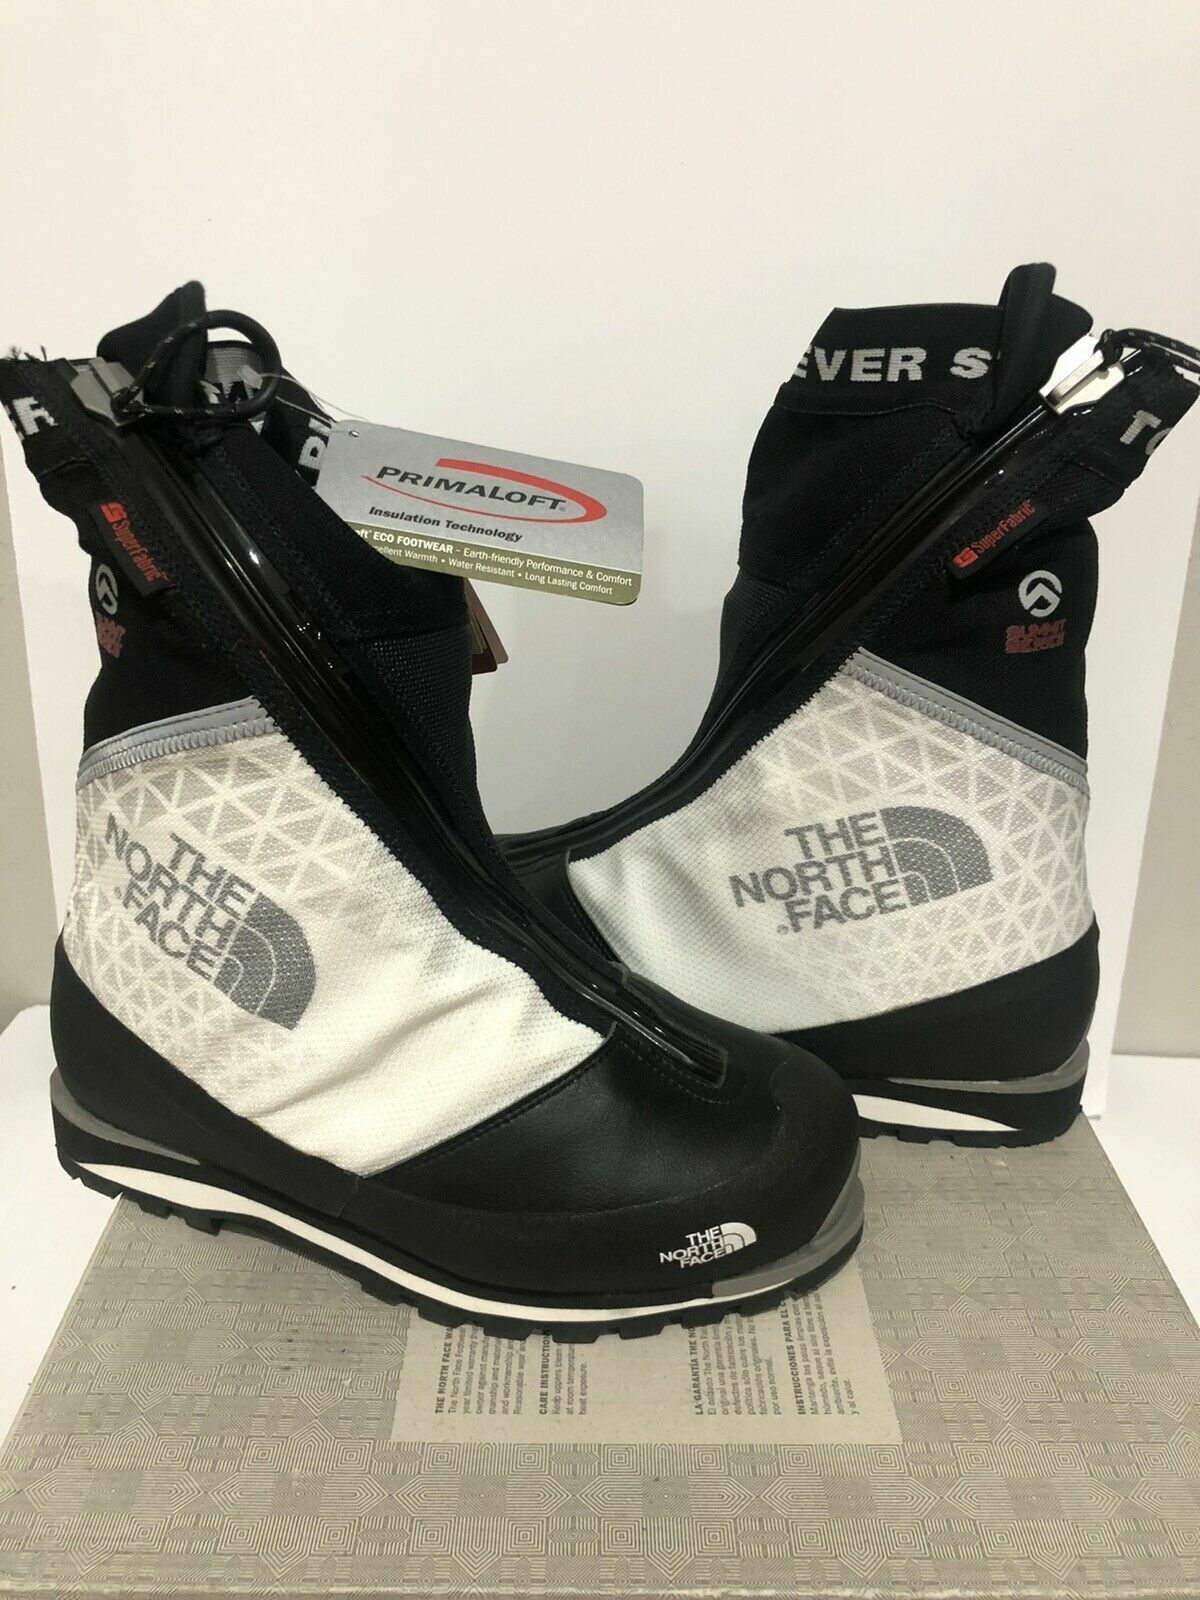 The North Face Verto S6K Extreme Boot - Men's TNF Black/TNF White A5T2KY4 - $299.95